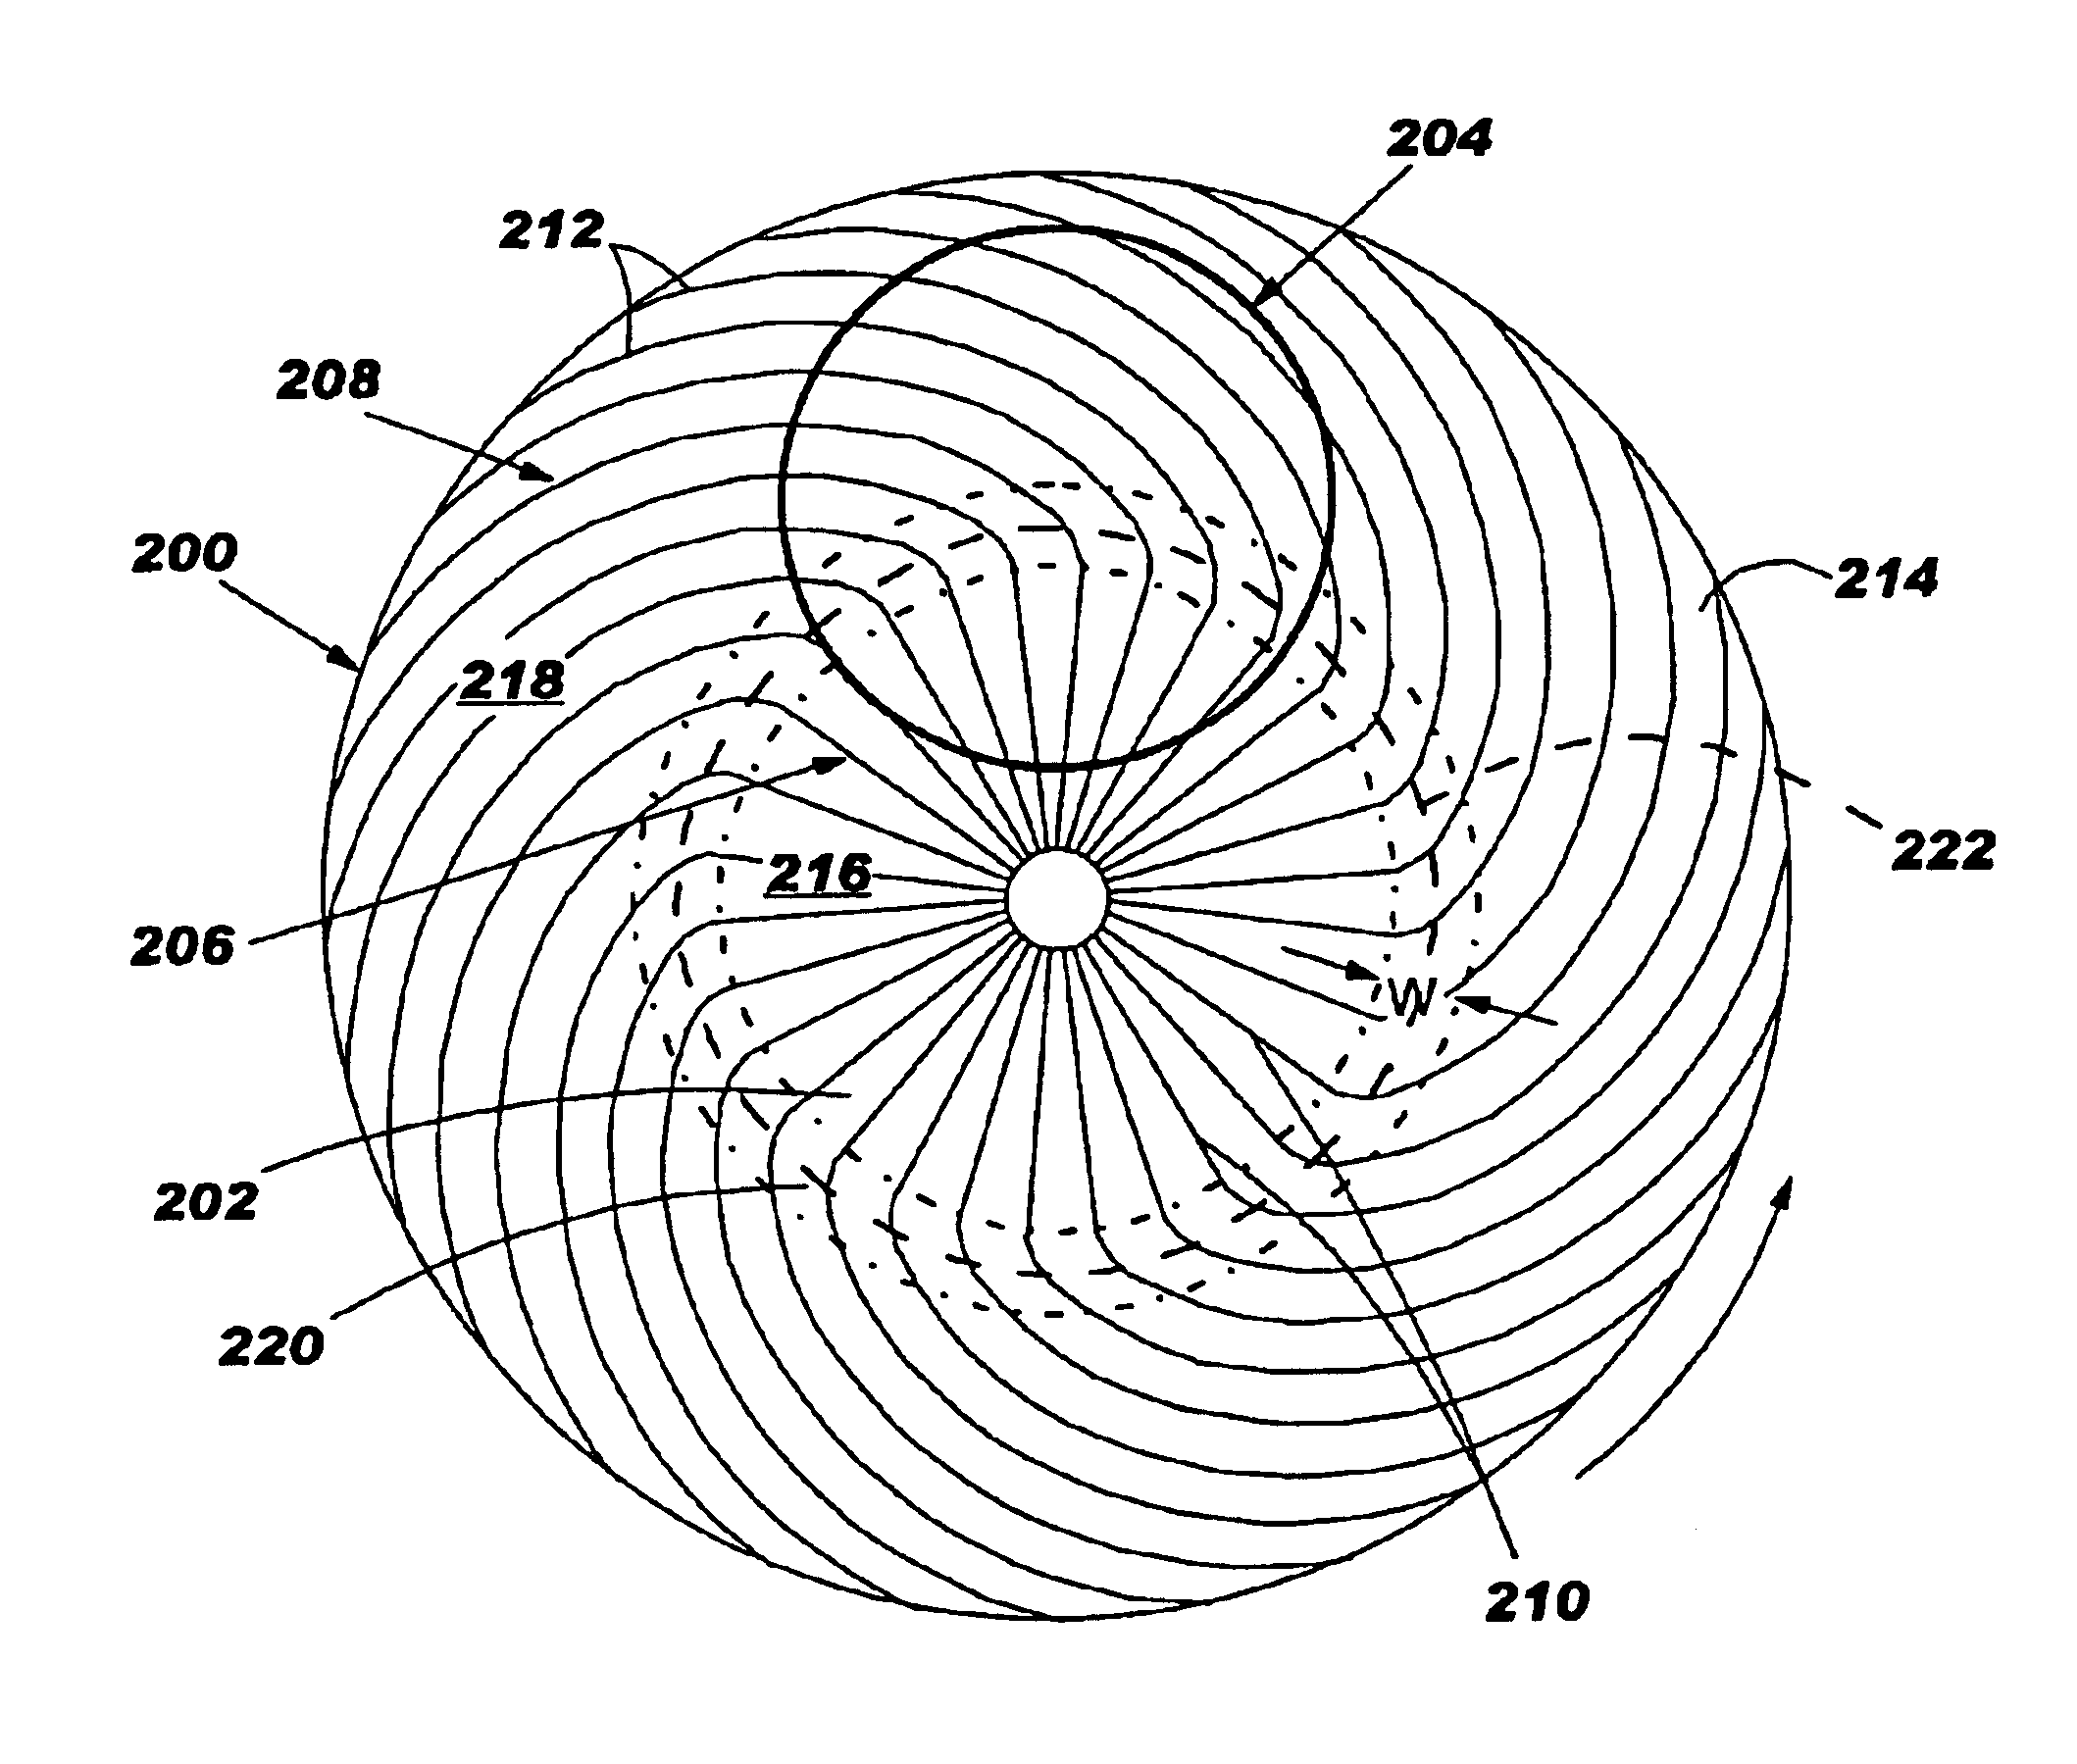 Chemical mechanical polishing pad having a process-dependent groove configuration